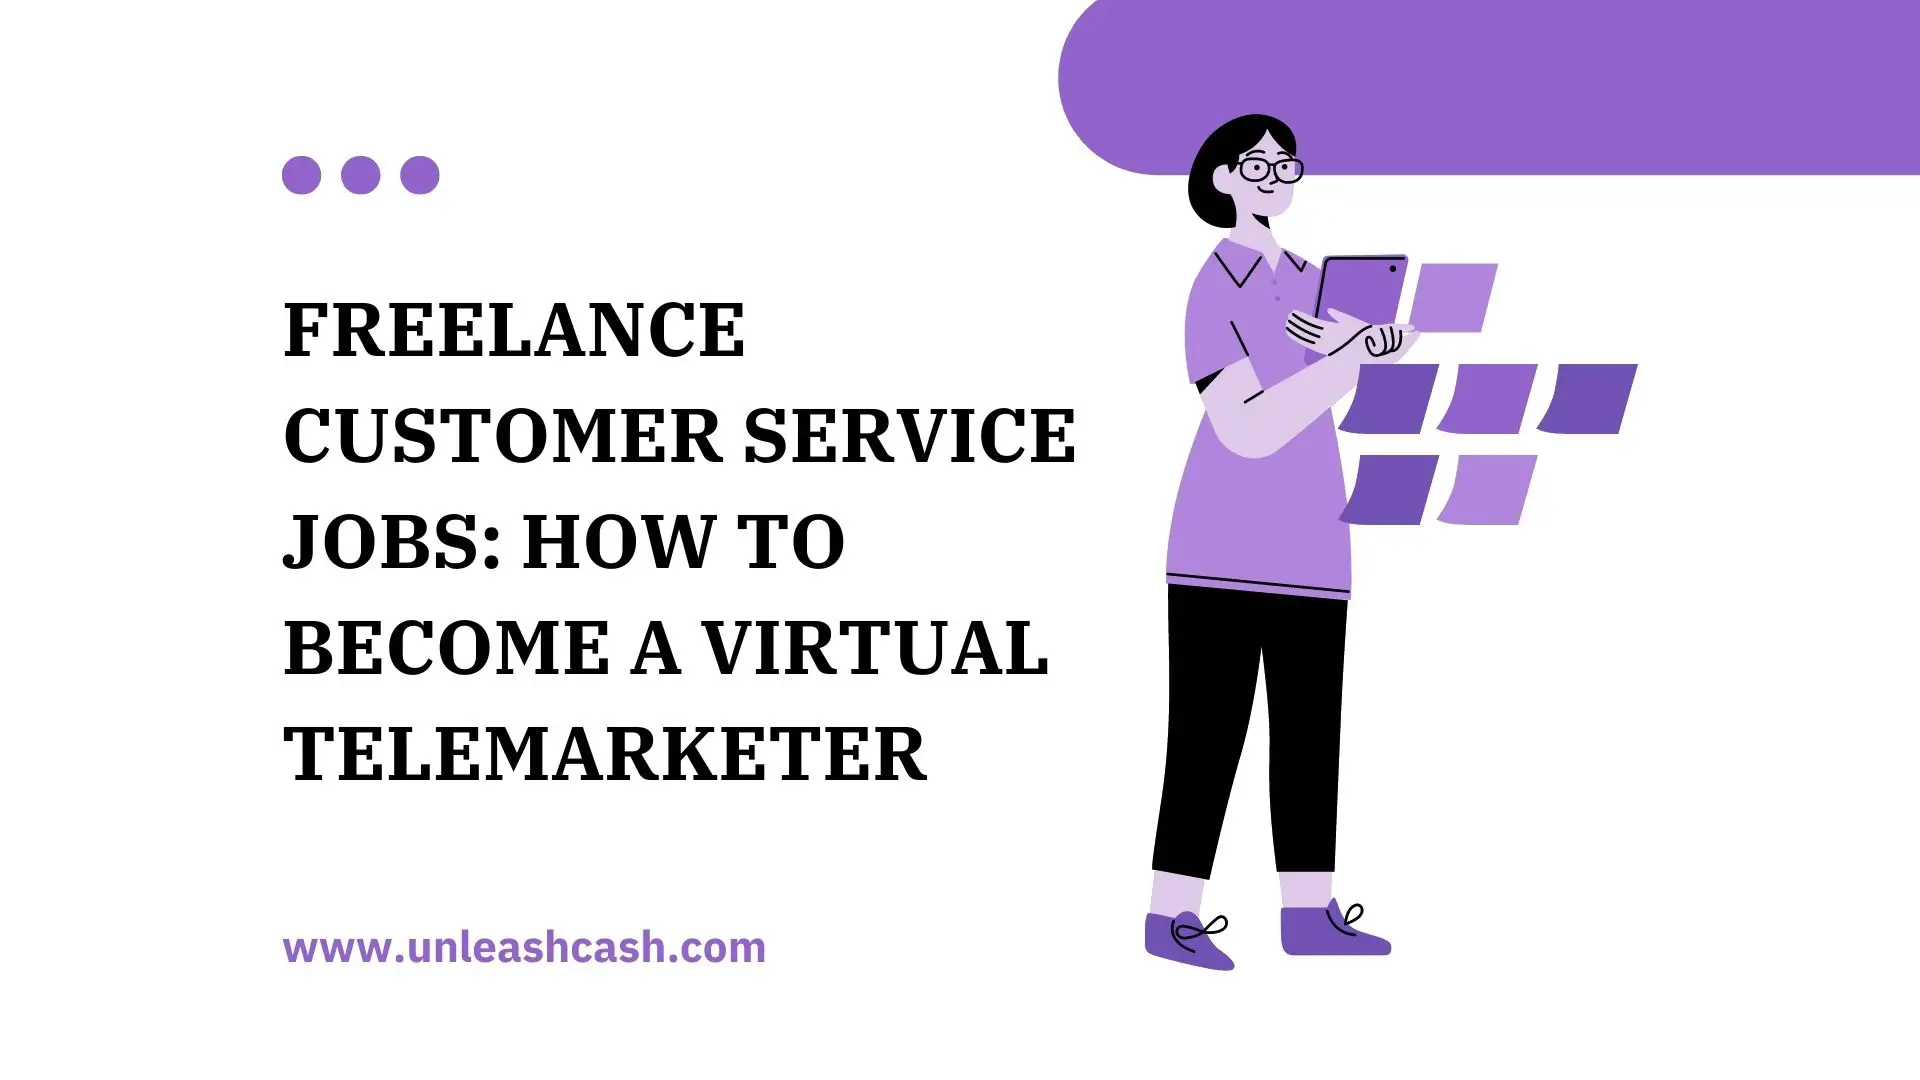 Freelance Customer Service Jobs: How To Become A Virtual Telemarketer